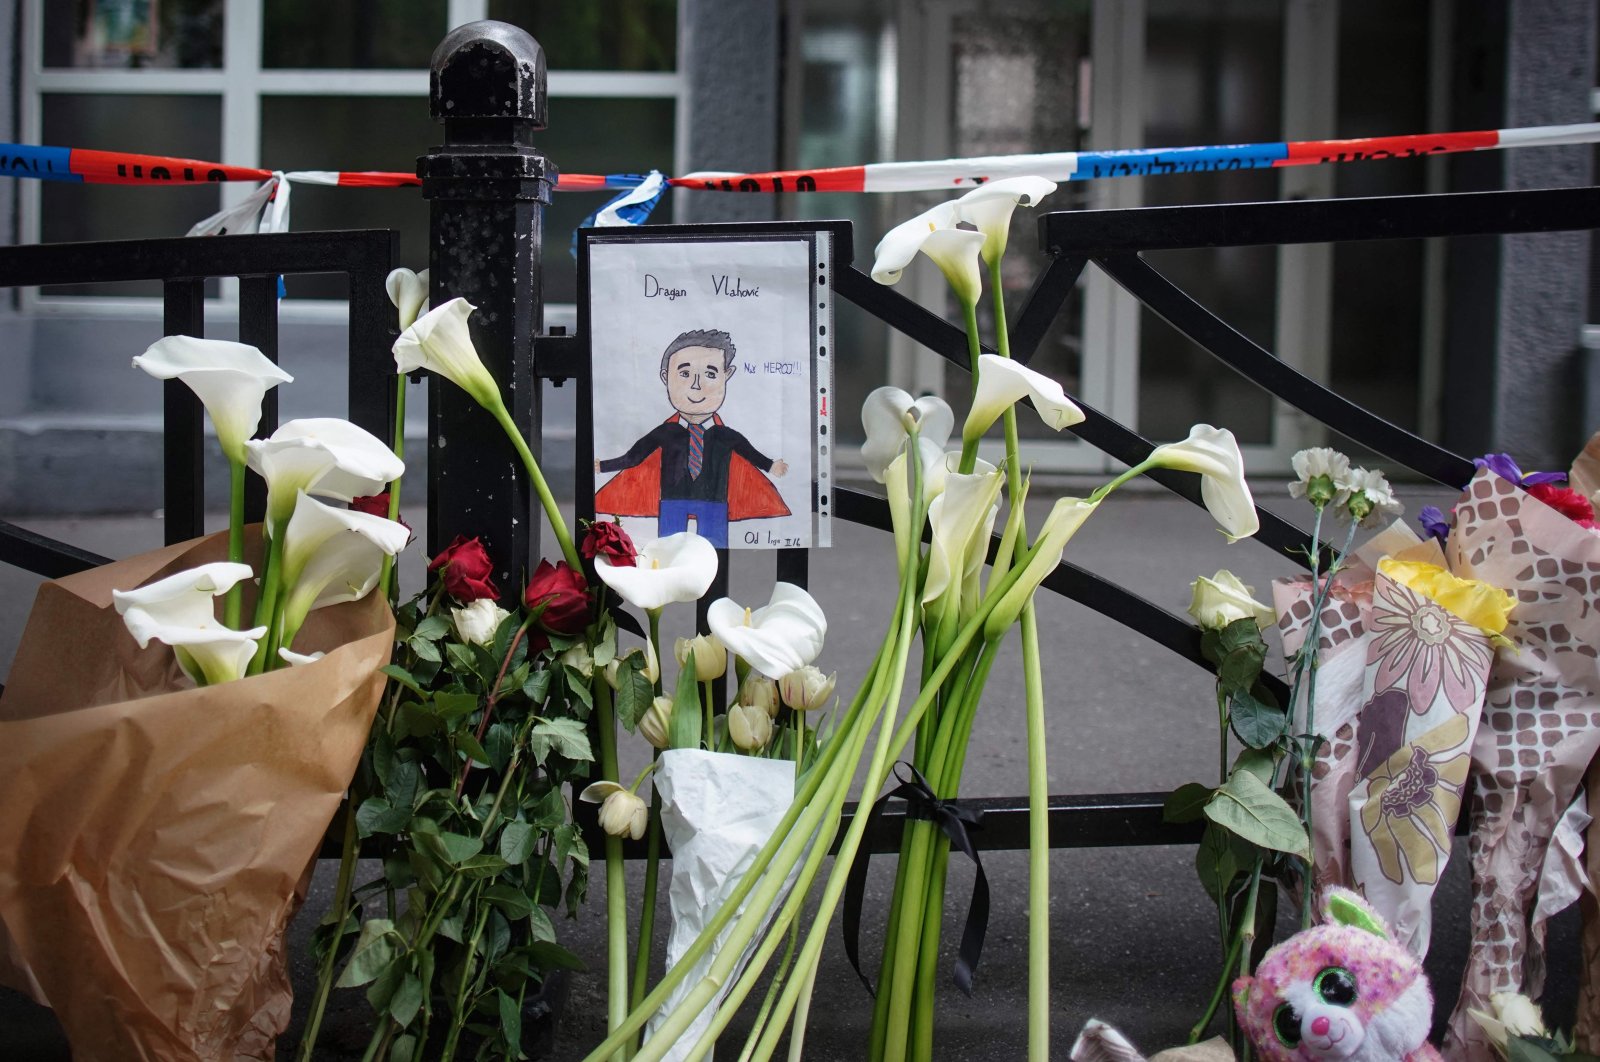 A drawing of security guard Dragan Vlahovic, who was killed in the attack, hangs on the fence of the Vladislav Ribnikar elementary school in the capital Belgrade, Serbia, May 4, 2023. (AFP Photo)